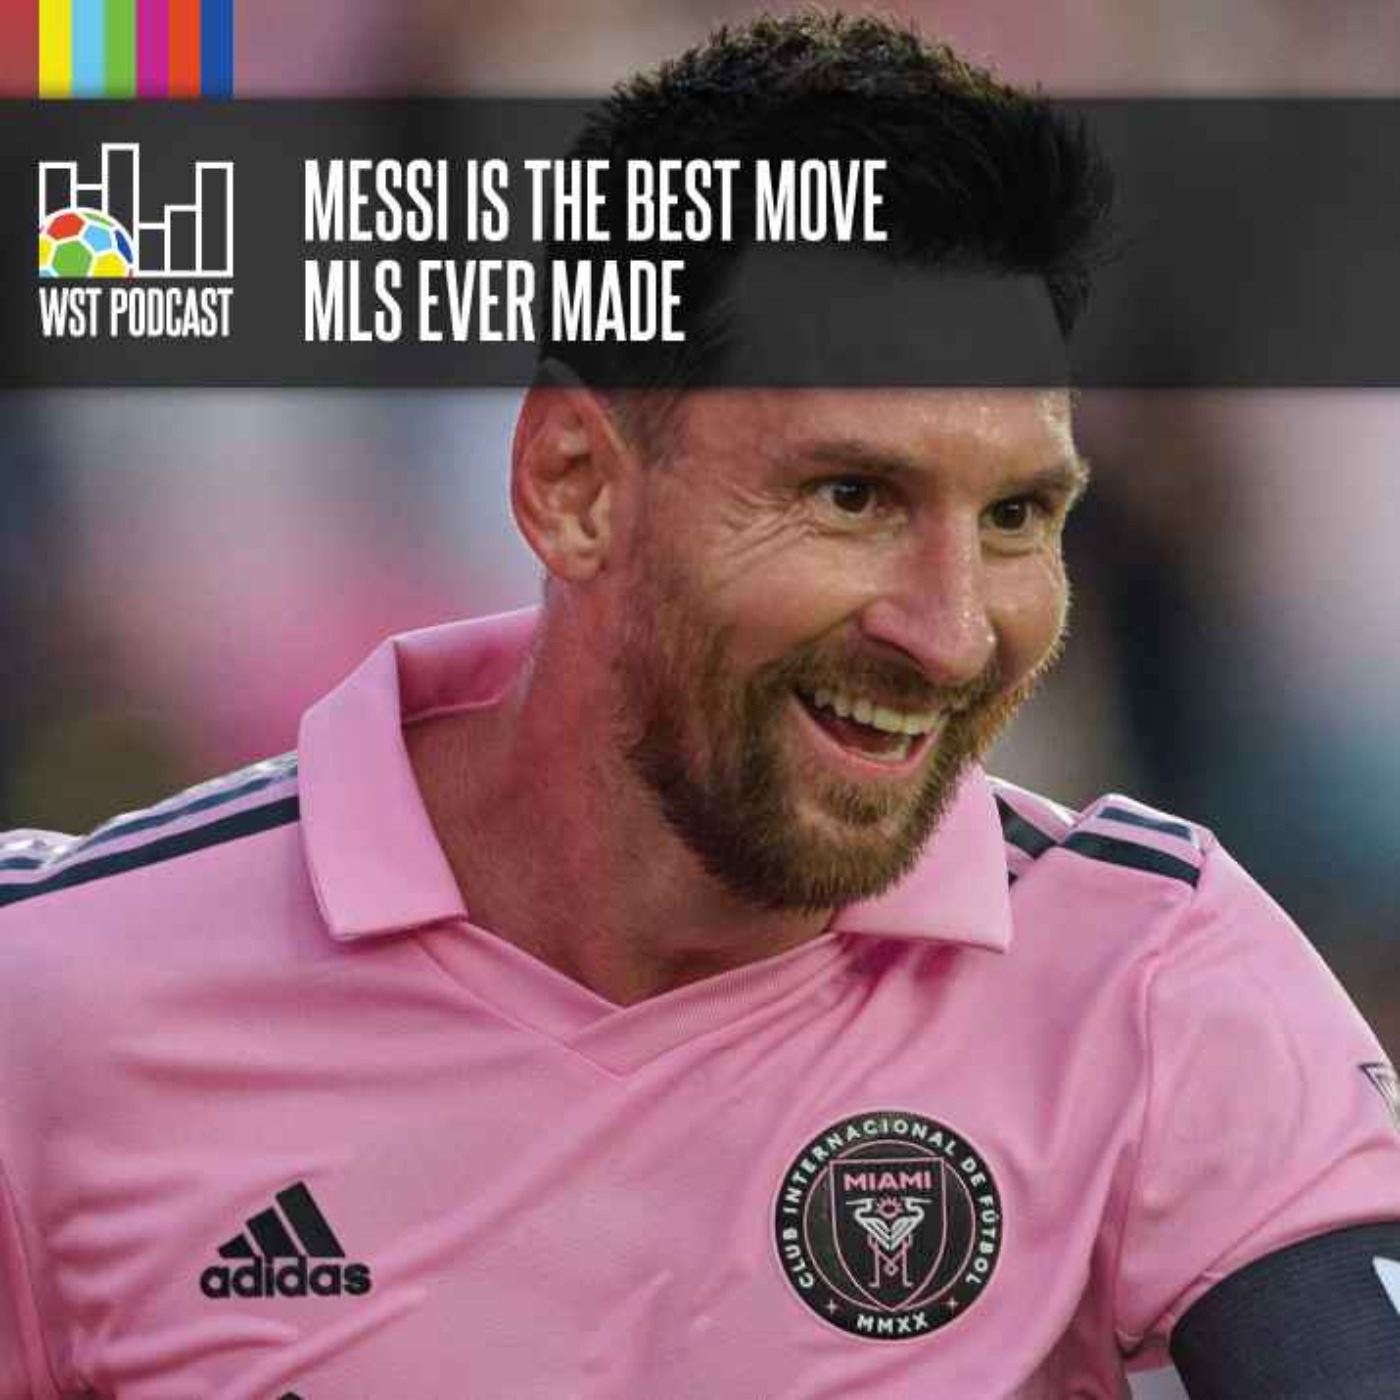 Messi is the best move MLS ever made